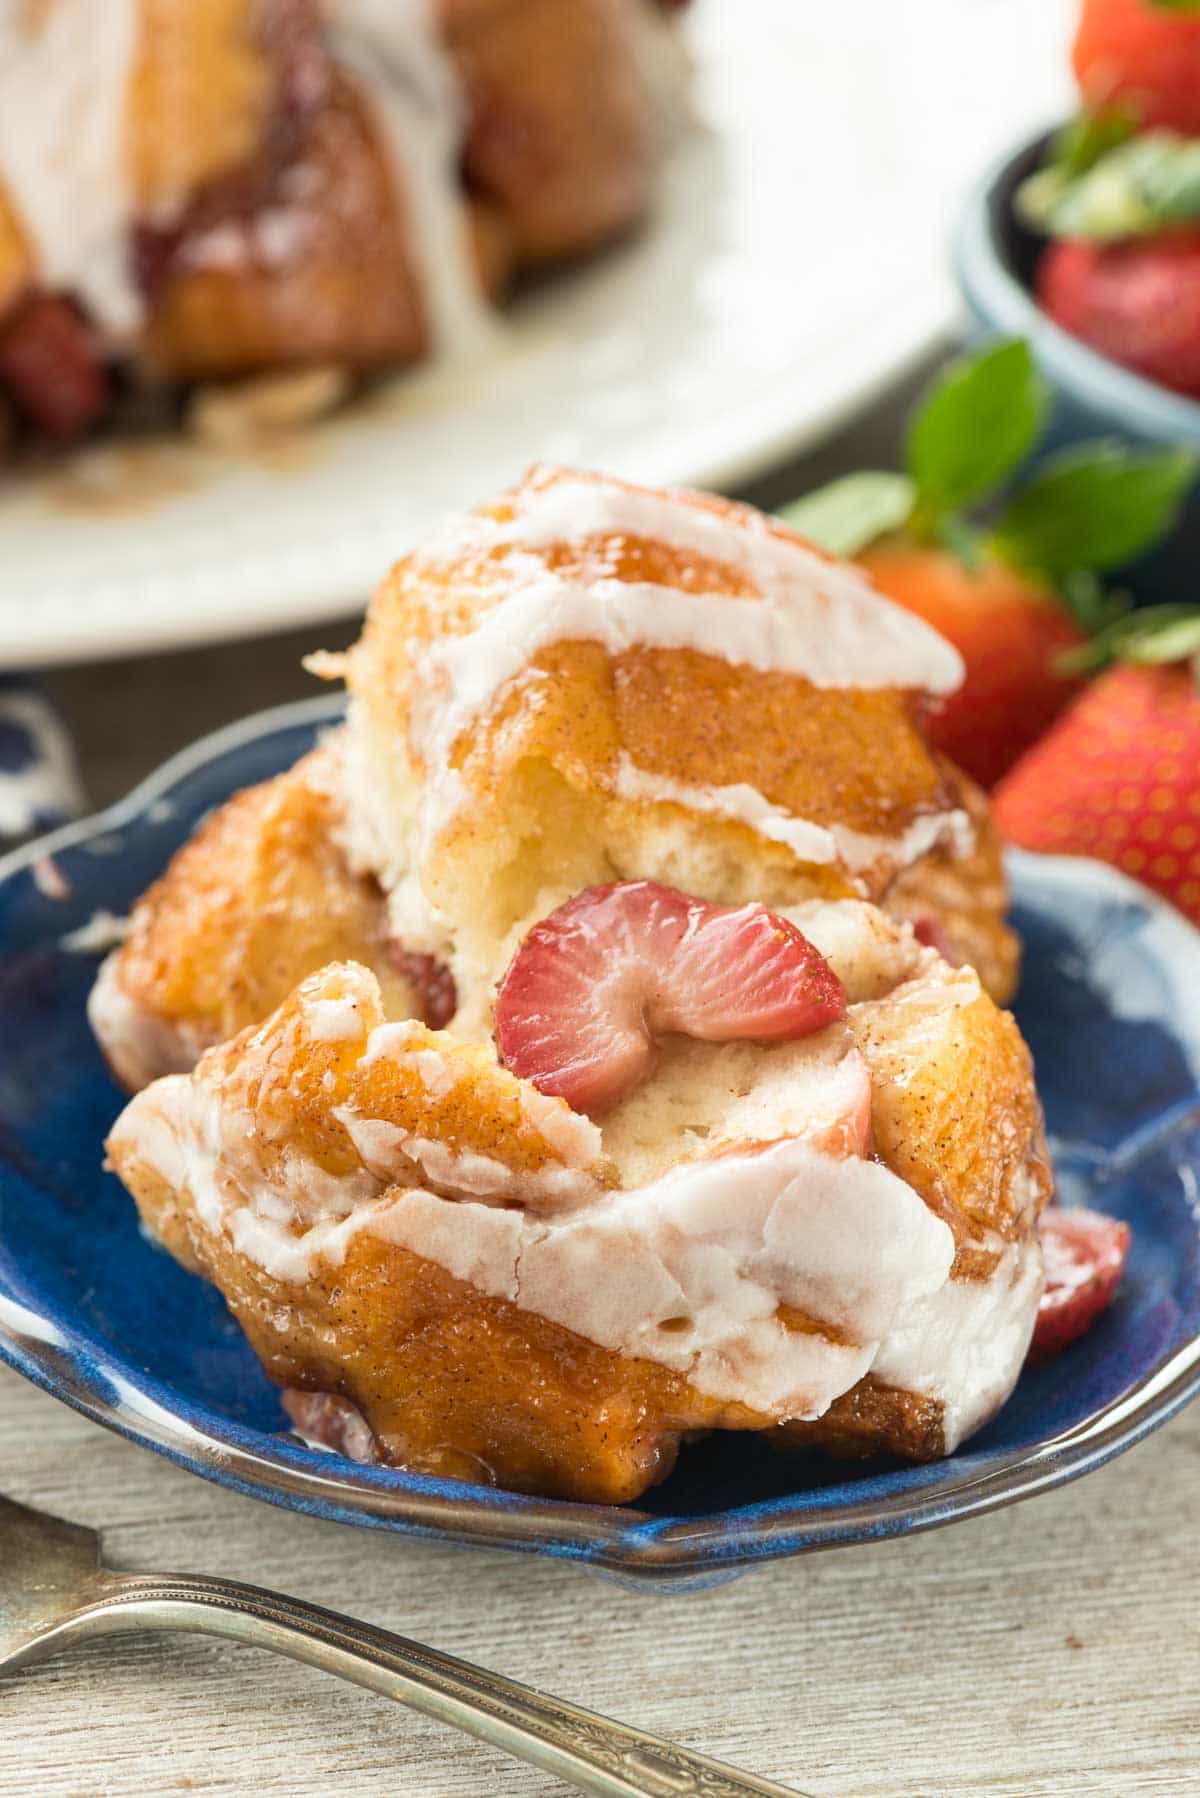 EASY Strawberry Monkey Bread with a sweet creamy glaze - this simple brunch recipe is classic monkey bread filled with fresh strawberries and a sweet glaze on top. We all loved it!